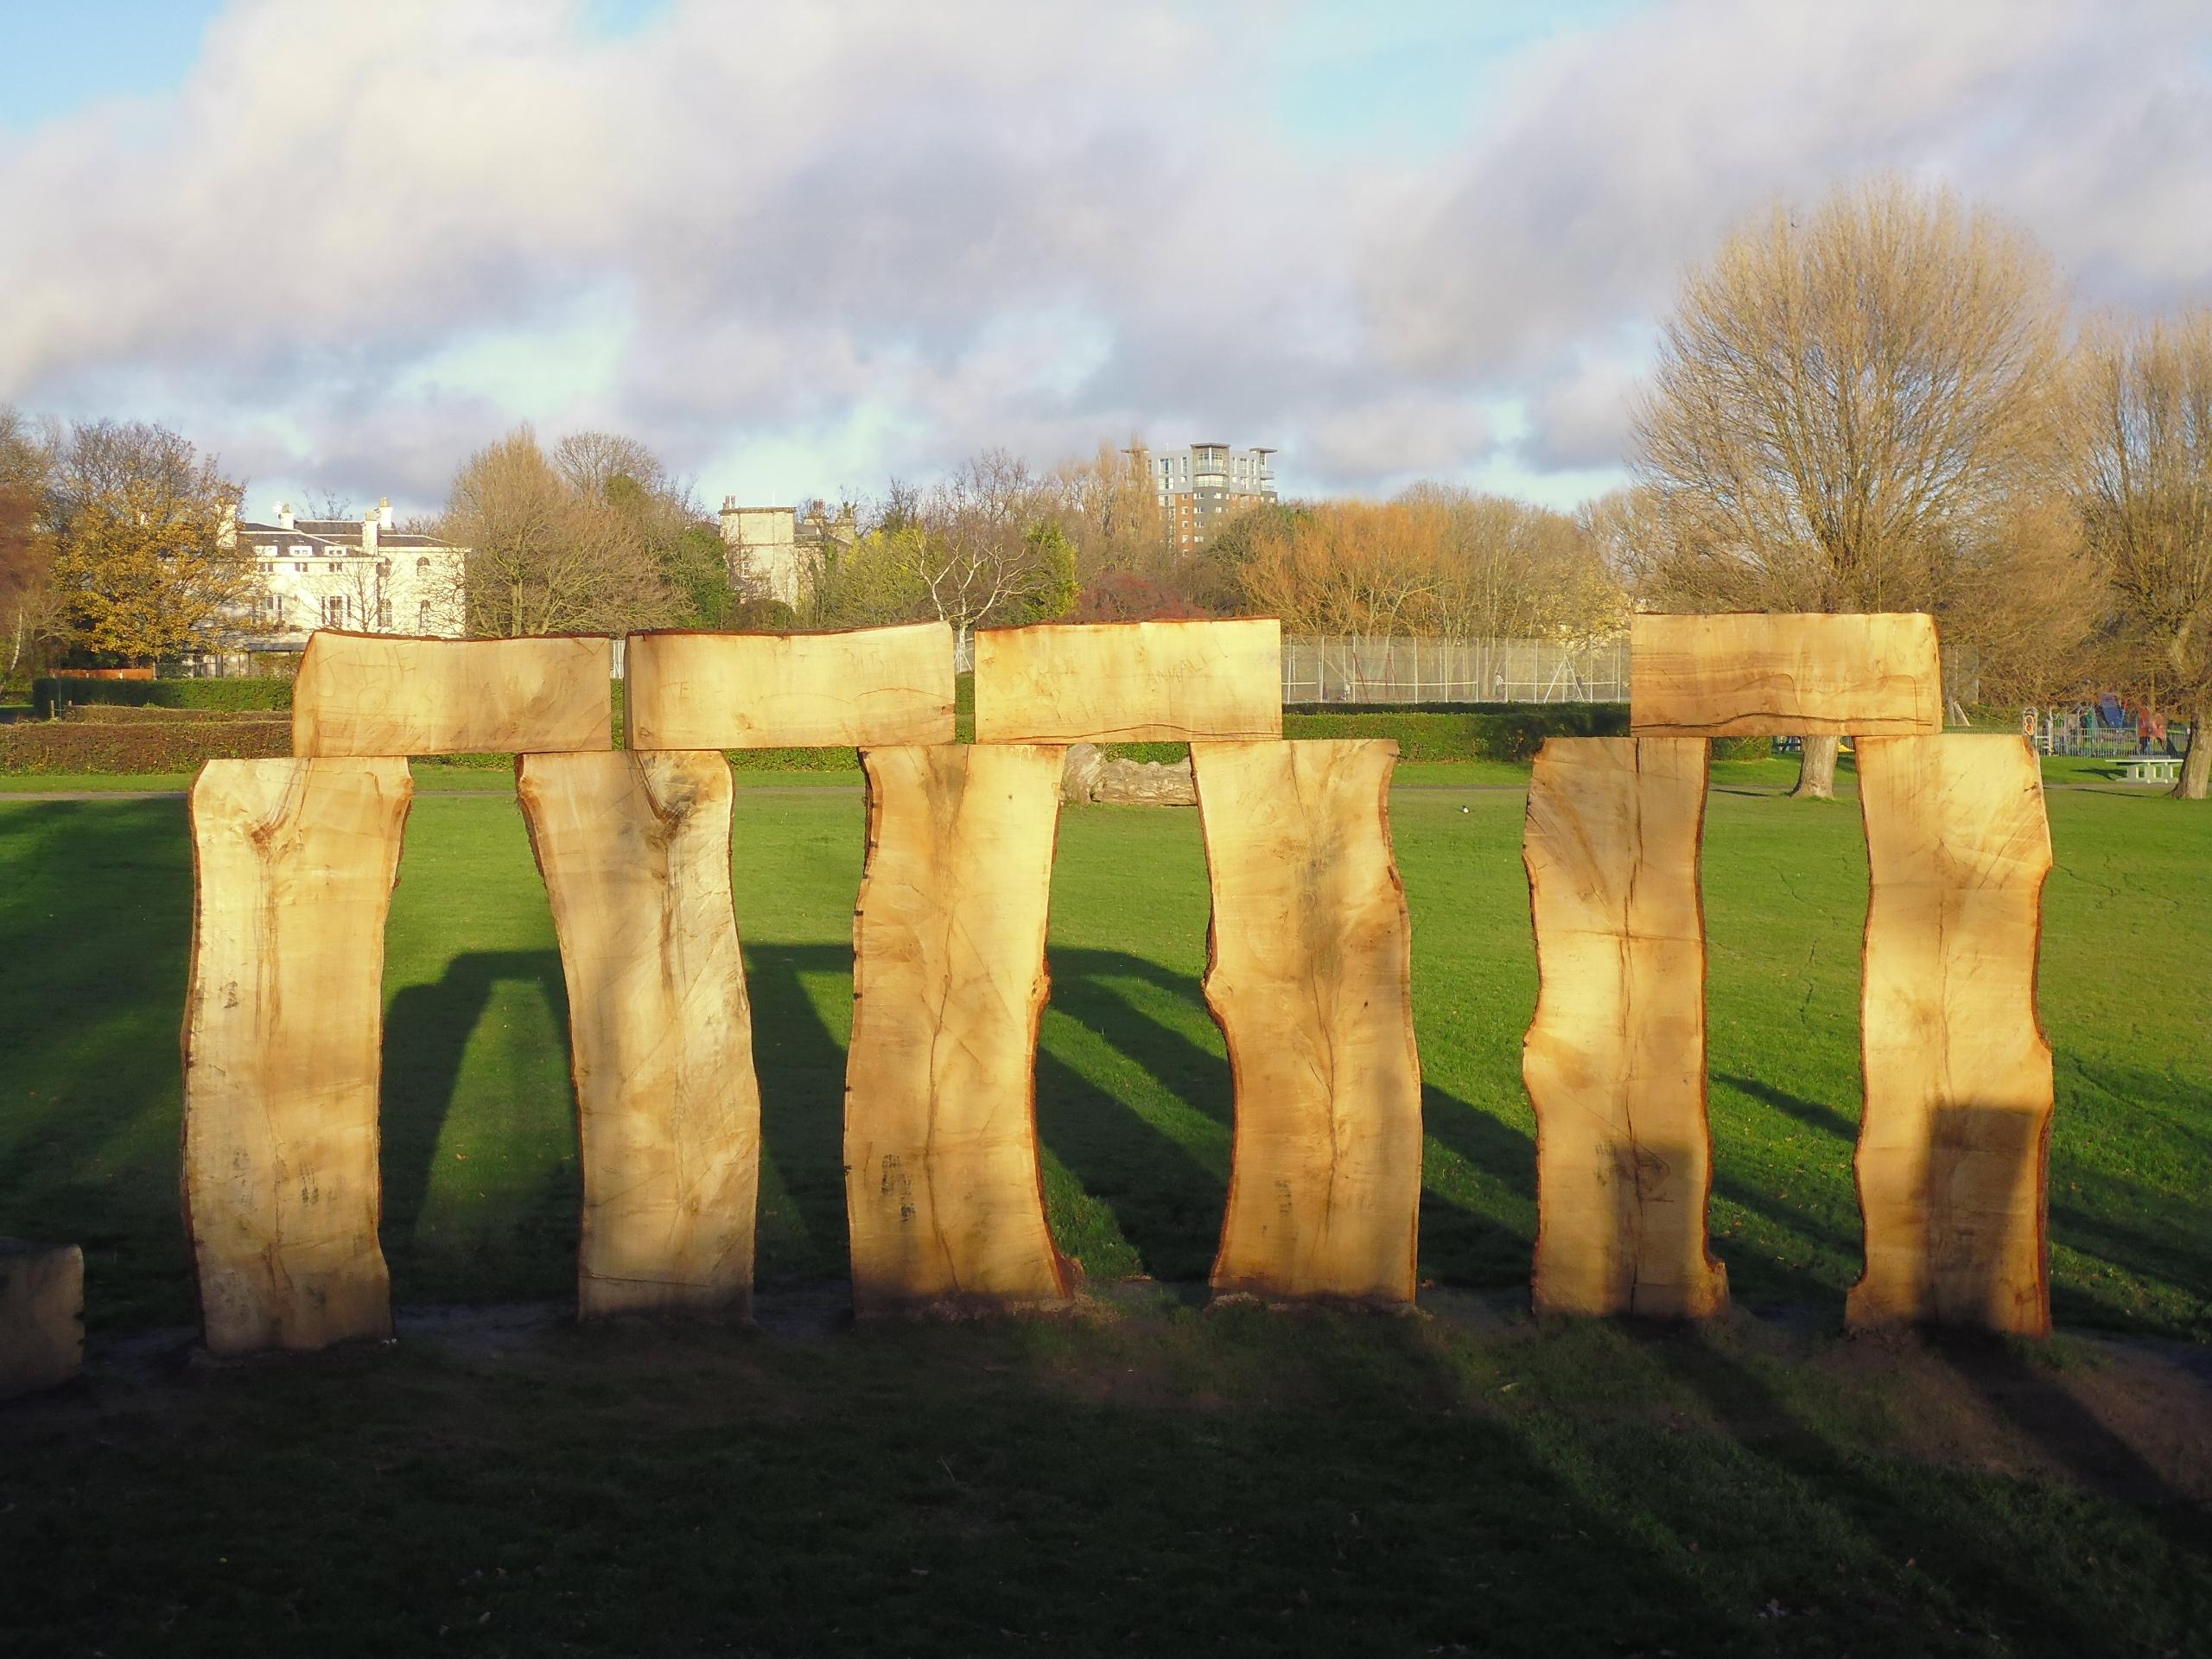 A great article in the Liverpool Echo regarding our Henge!